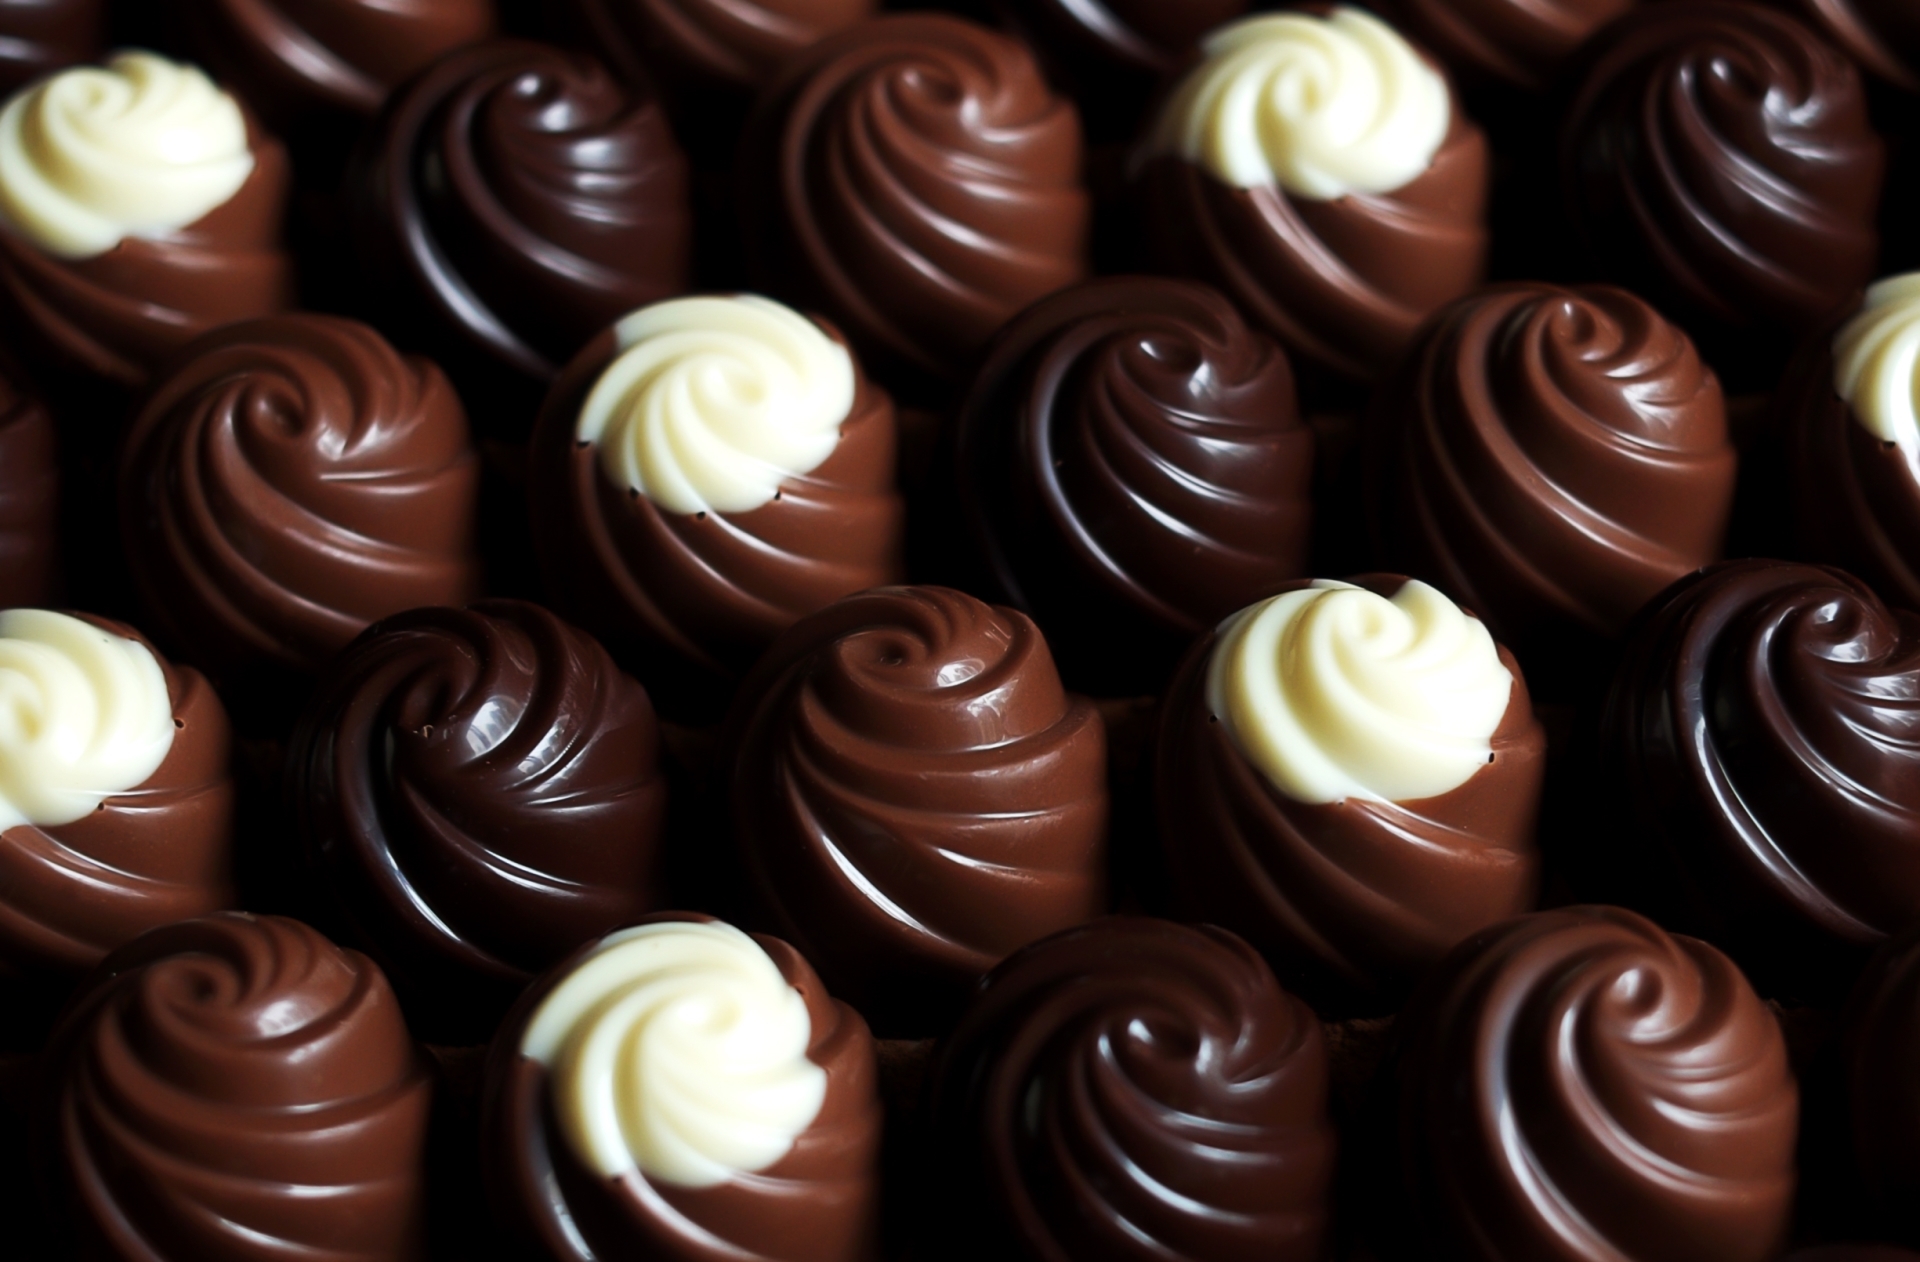 Chocolate Sweets Wallpaper:1920x1262